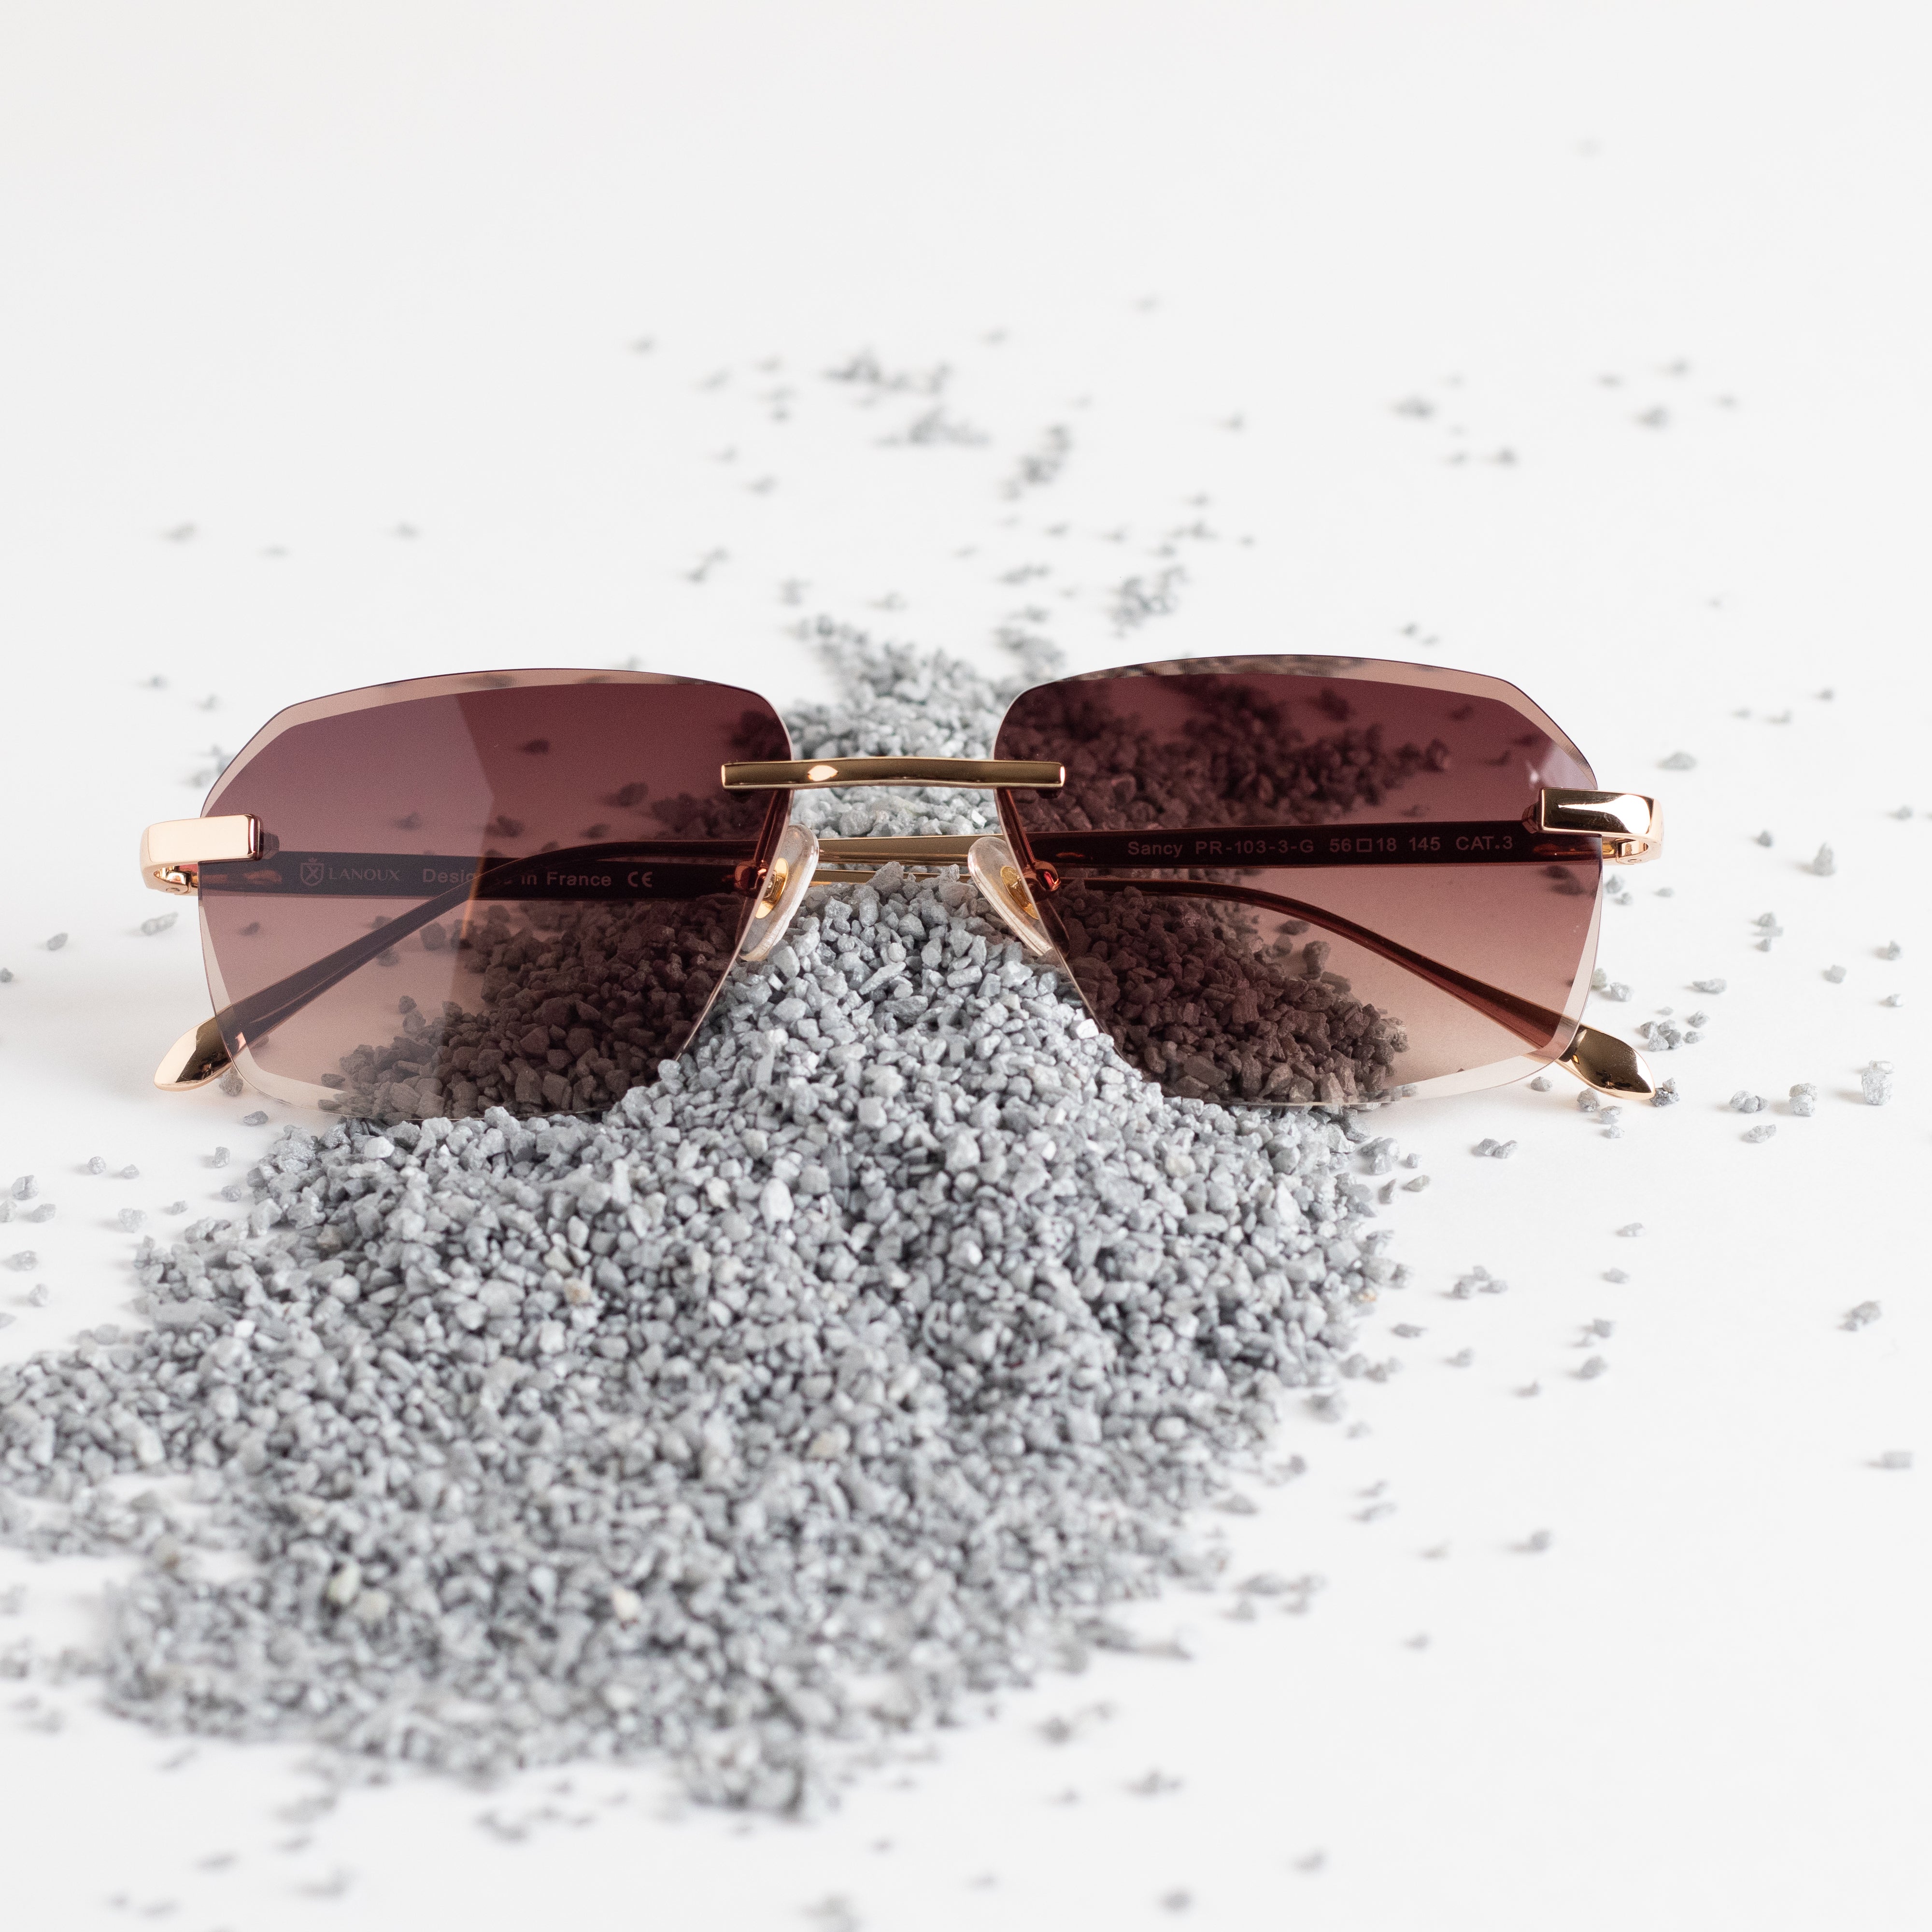 The 'Sancy' rimless sunglasses are displayed on a textured surface, their modern brown lenses complementing the 18k gold frames with a diamond cut. The elegant design and rich color palette are highlighted against a backdrop of scattered grey granules, symbolizing the brand's attention to detail and luxury.